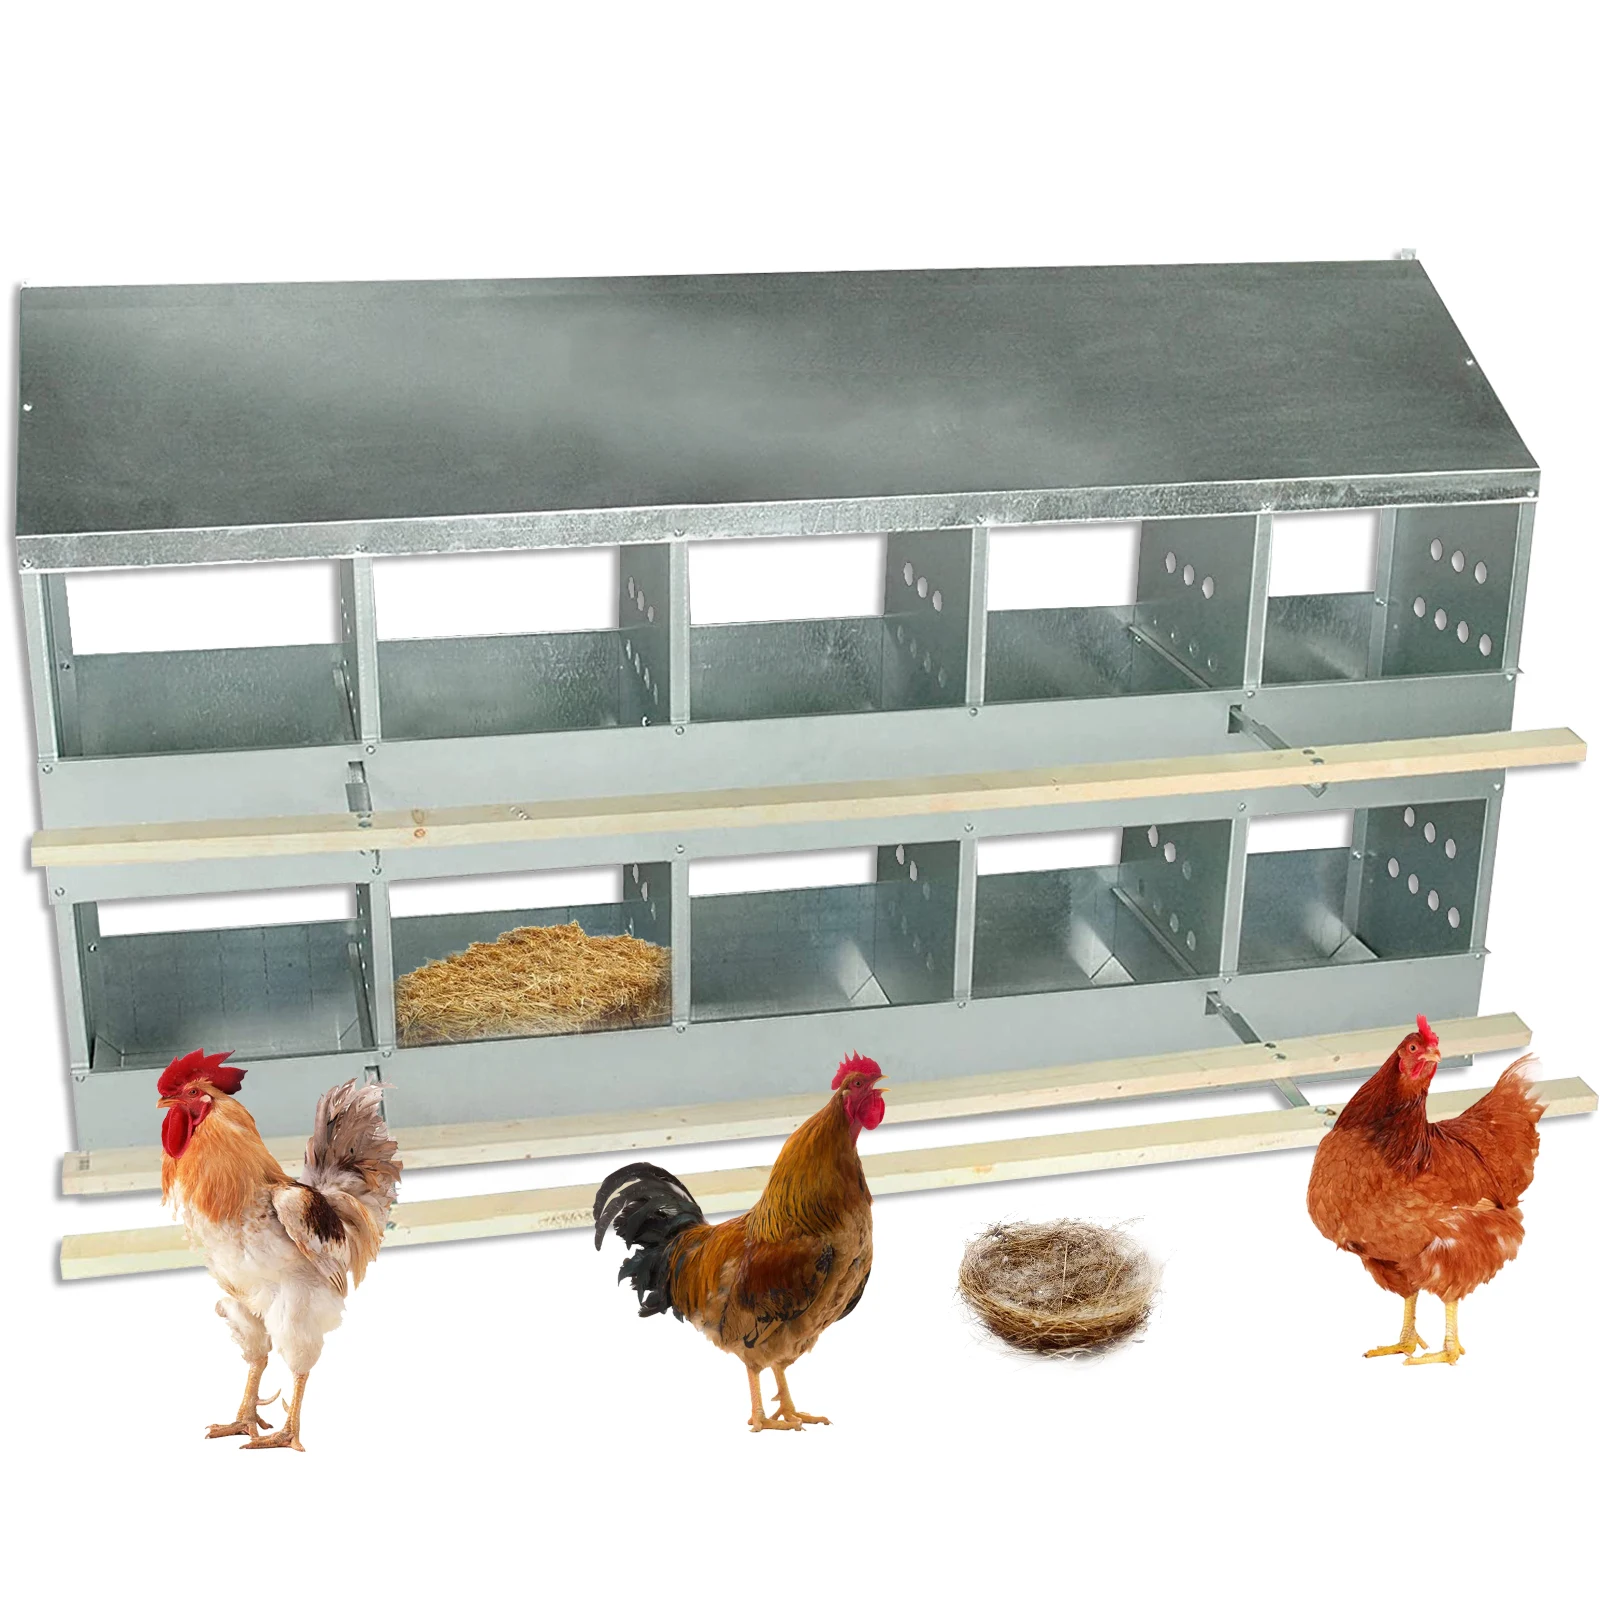 Nest Laying Box Easy to Operate Economy 10 Hole Hen Chicken Nesting